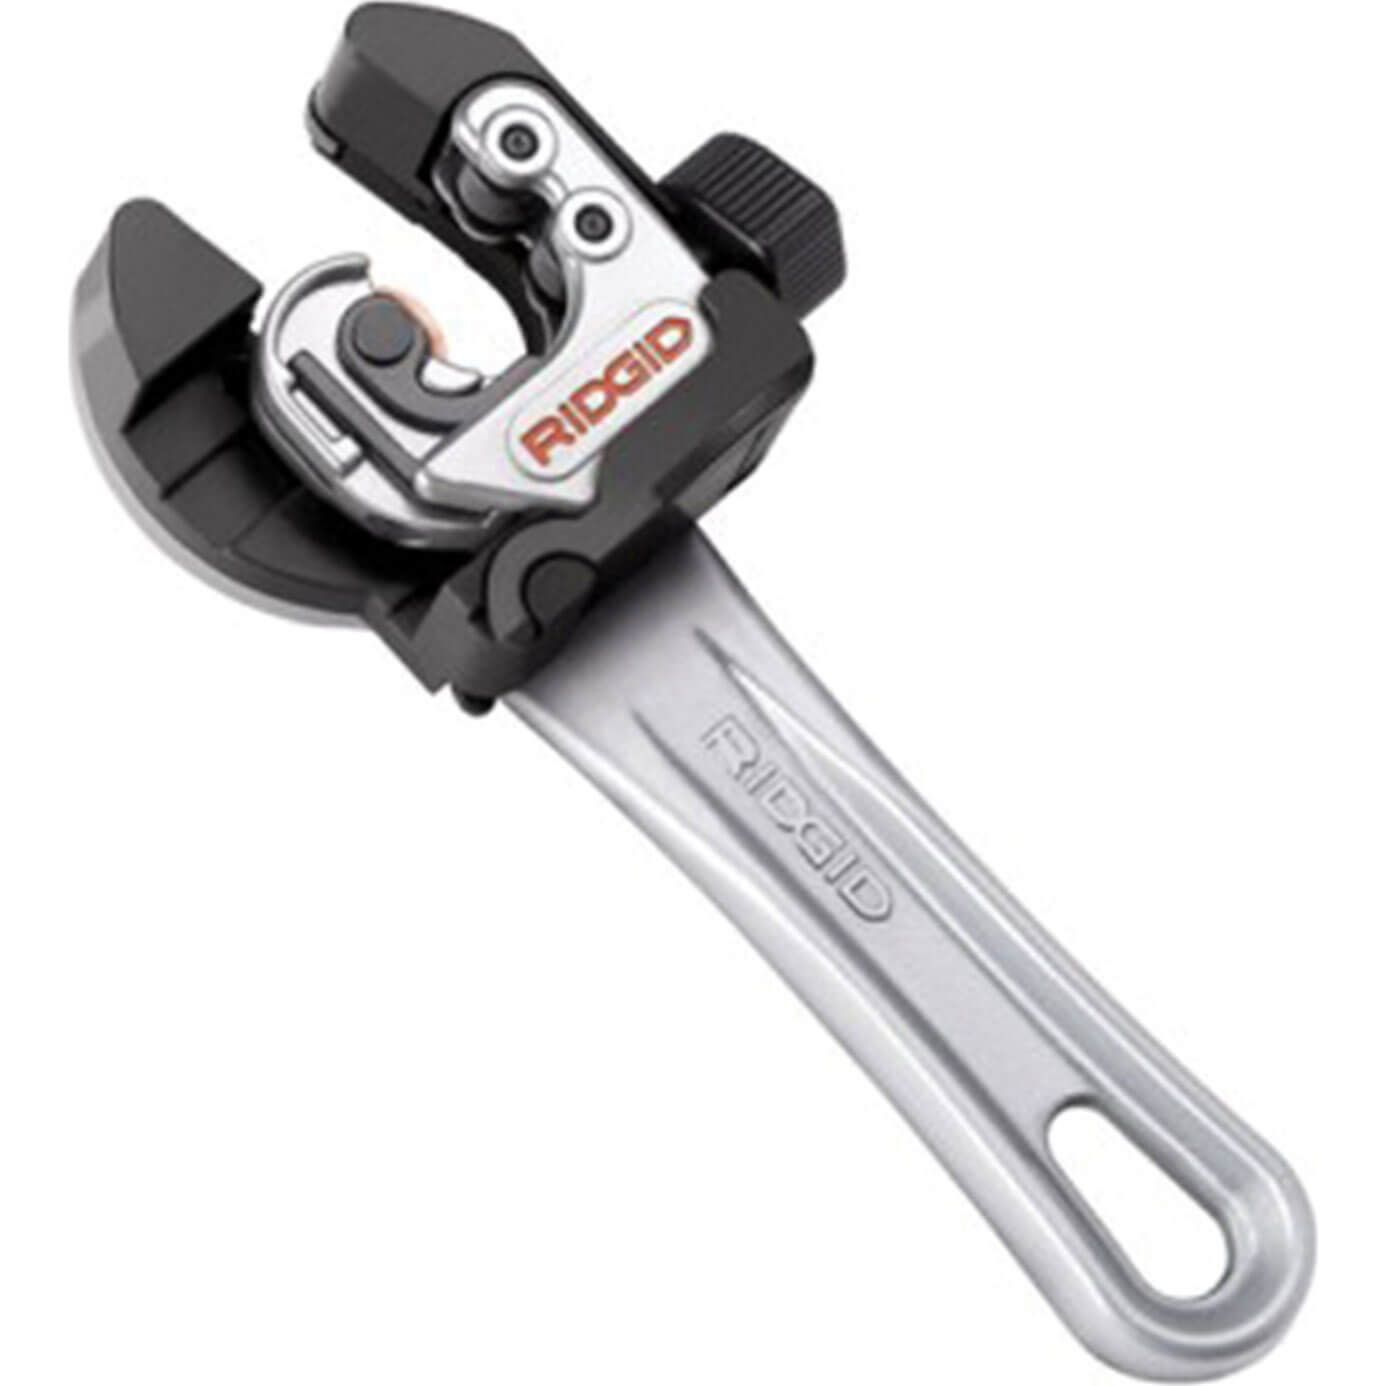 Photo of Ridgid Autofeed Adjustable Pipe Cutter 6mm - 28mm